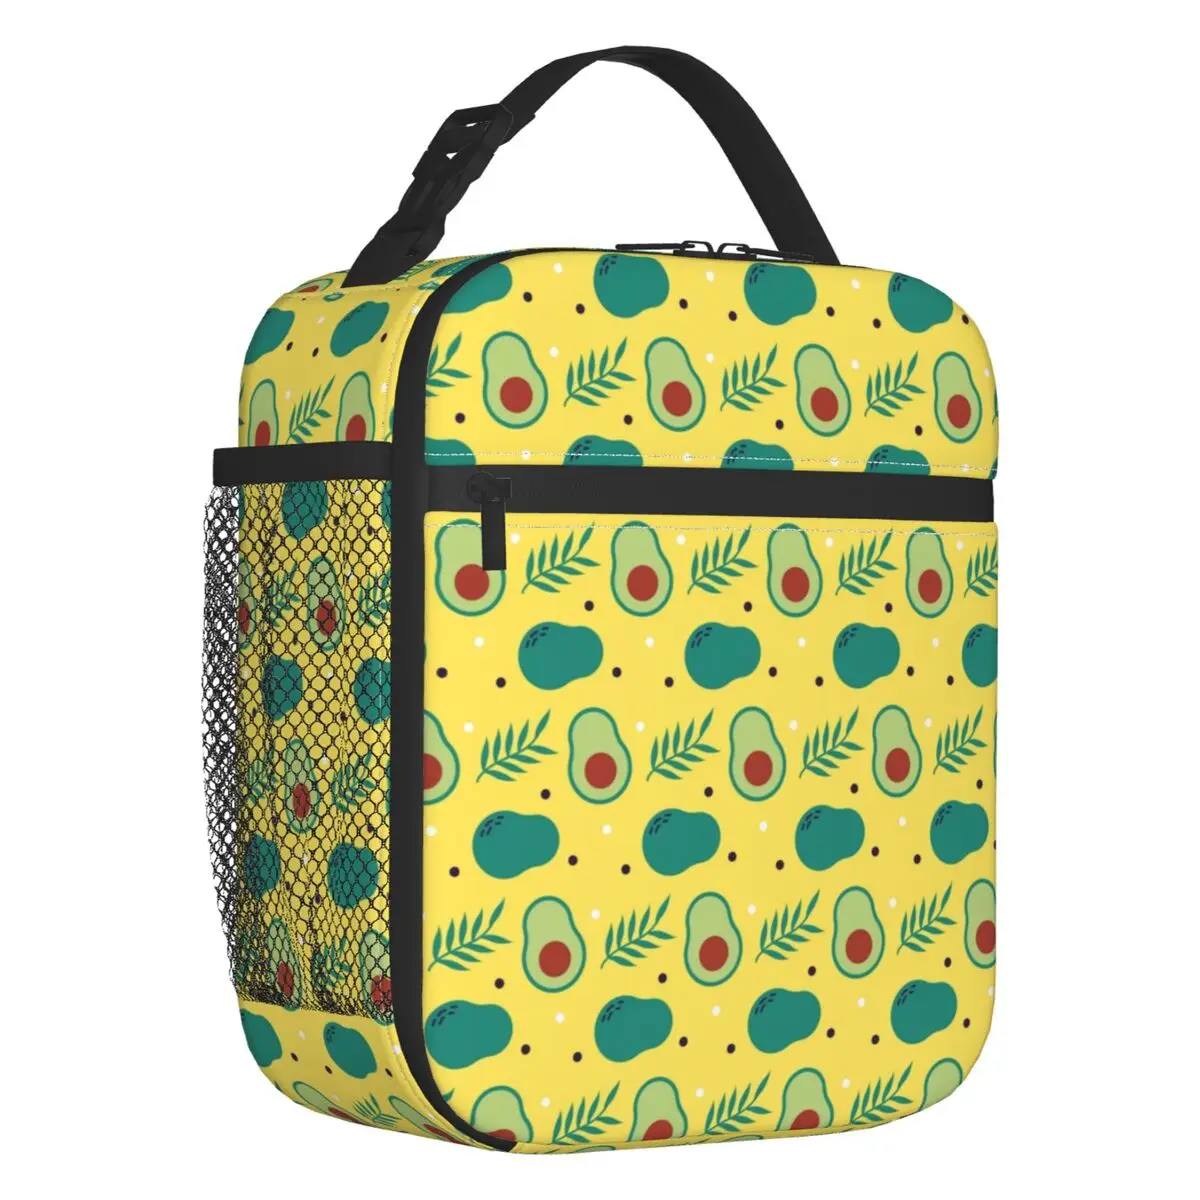 Funny Avocado Tree Pattern Thermal Insulated Lunch Bag Women Resuable Lunch Tote for School Storage Food Box